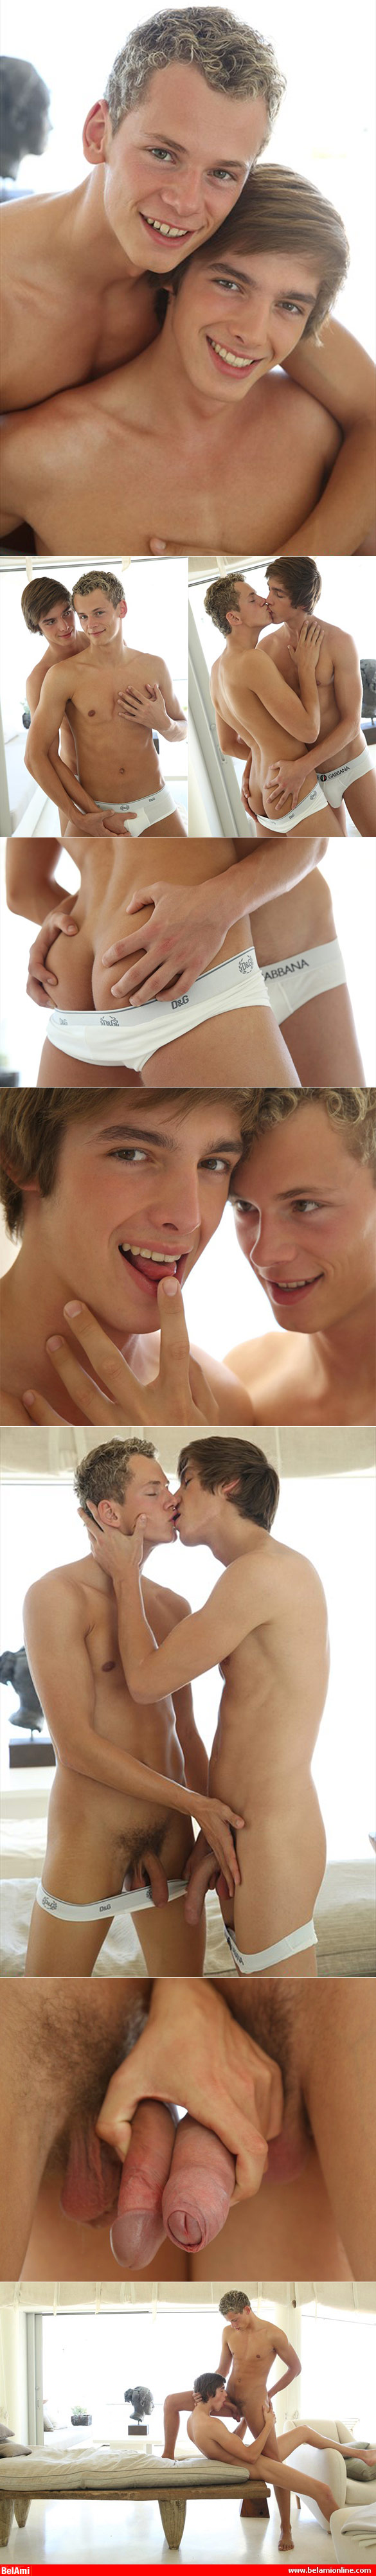 BelAmi: Jerome Exupery and Helmut Huxley's photo session